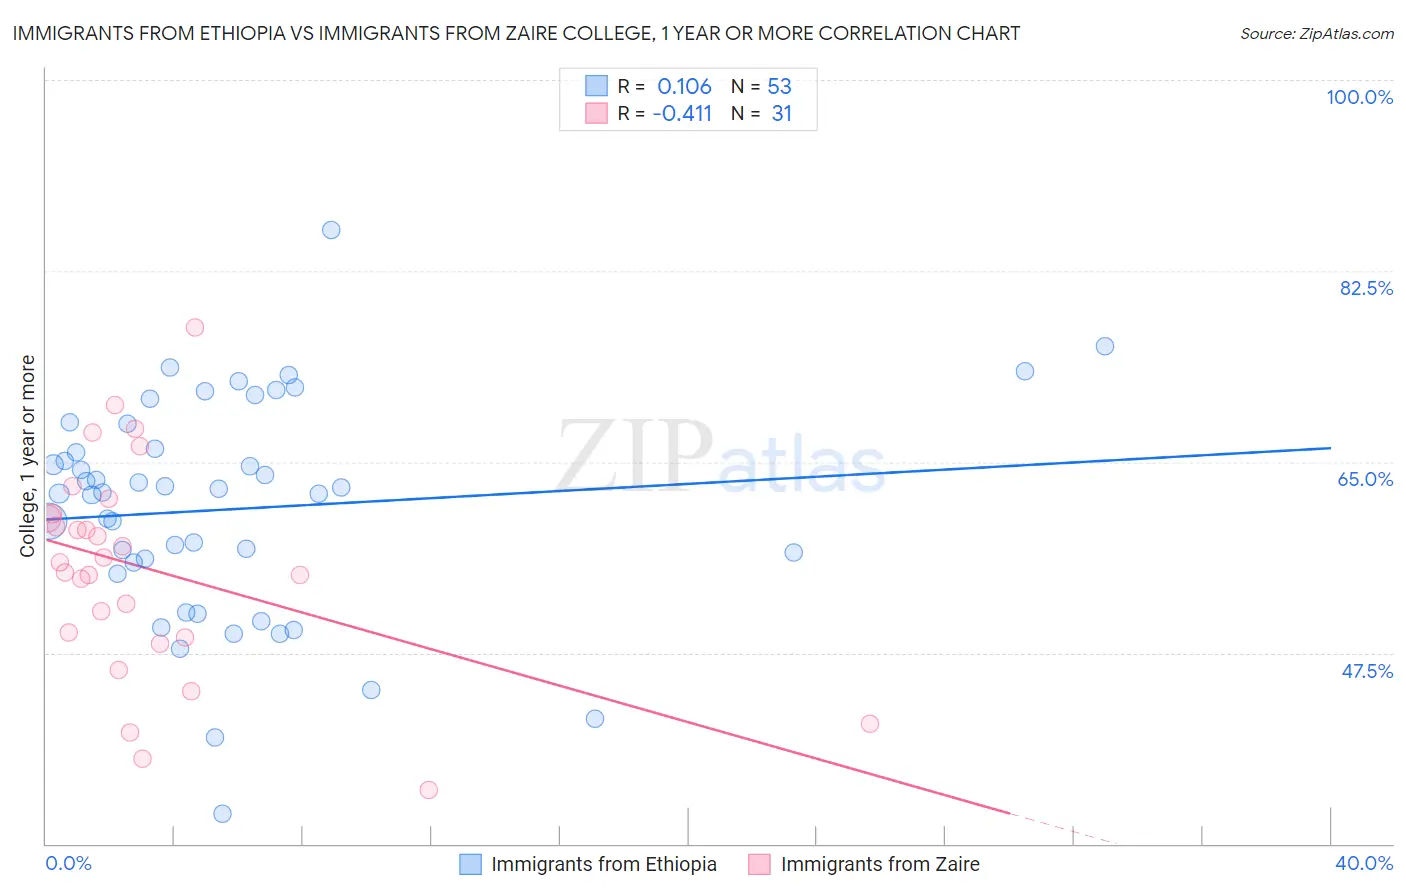 Immigrants from Ethiopia vs Immigrants from Zaire College, 1 year or more